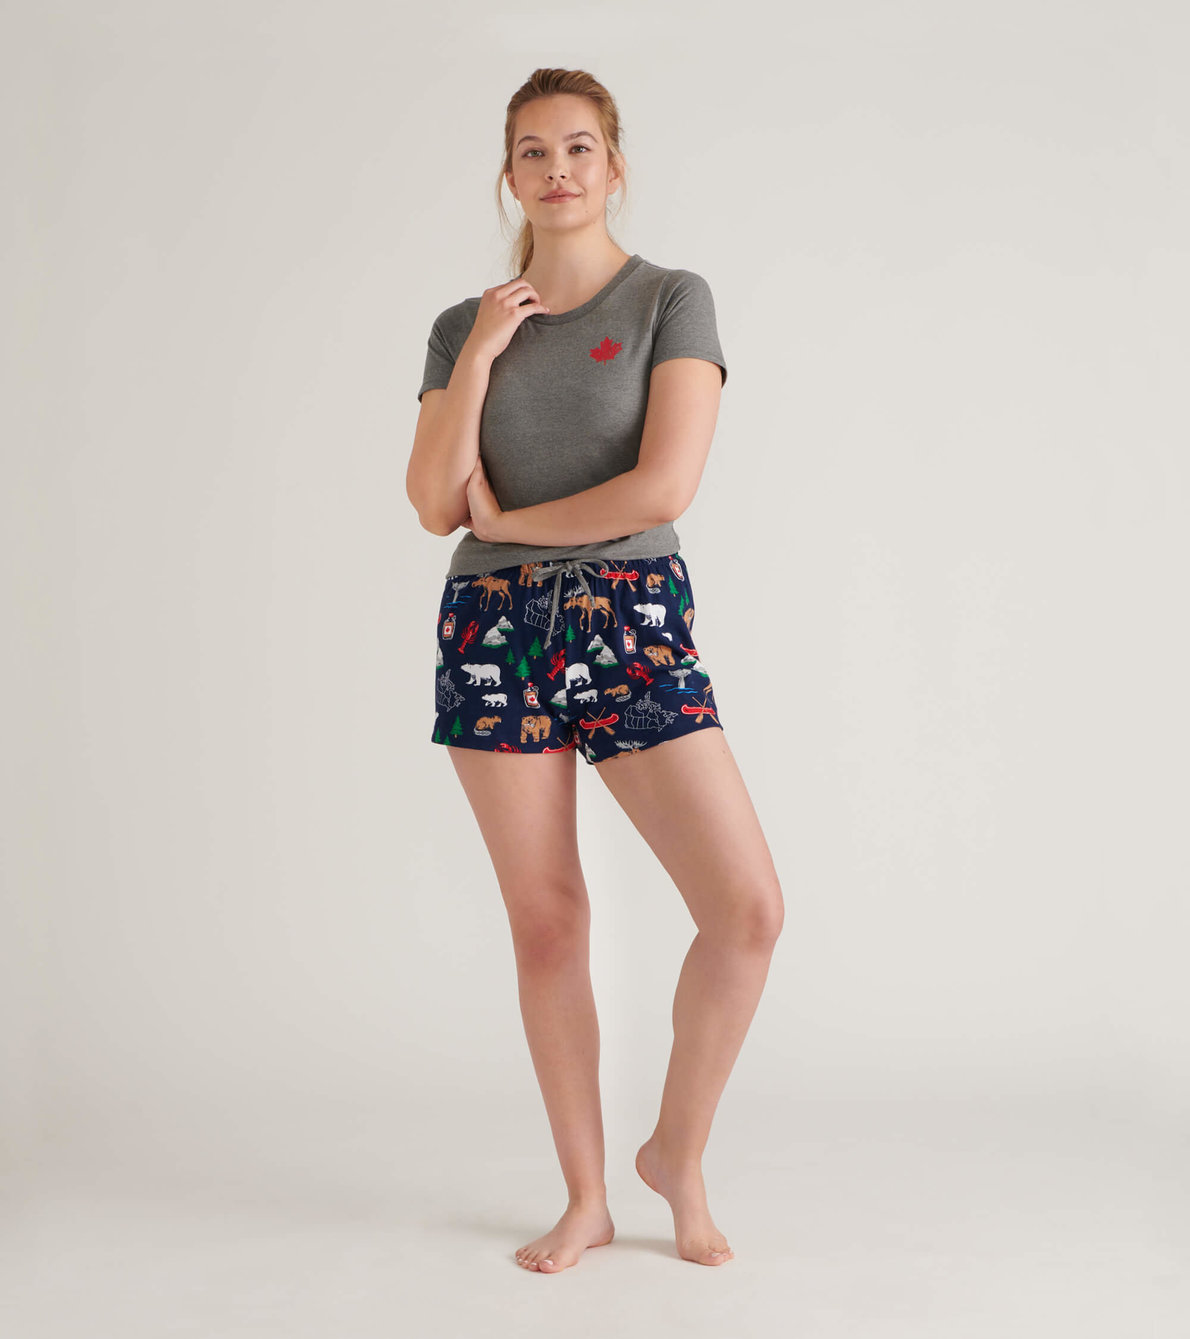 View larger image of True North Women's Sleep Shorts